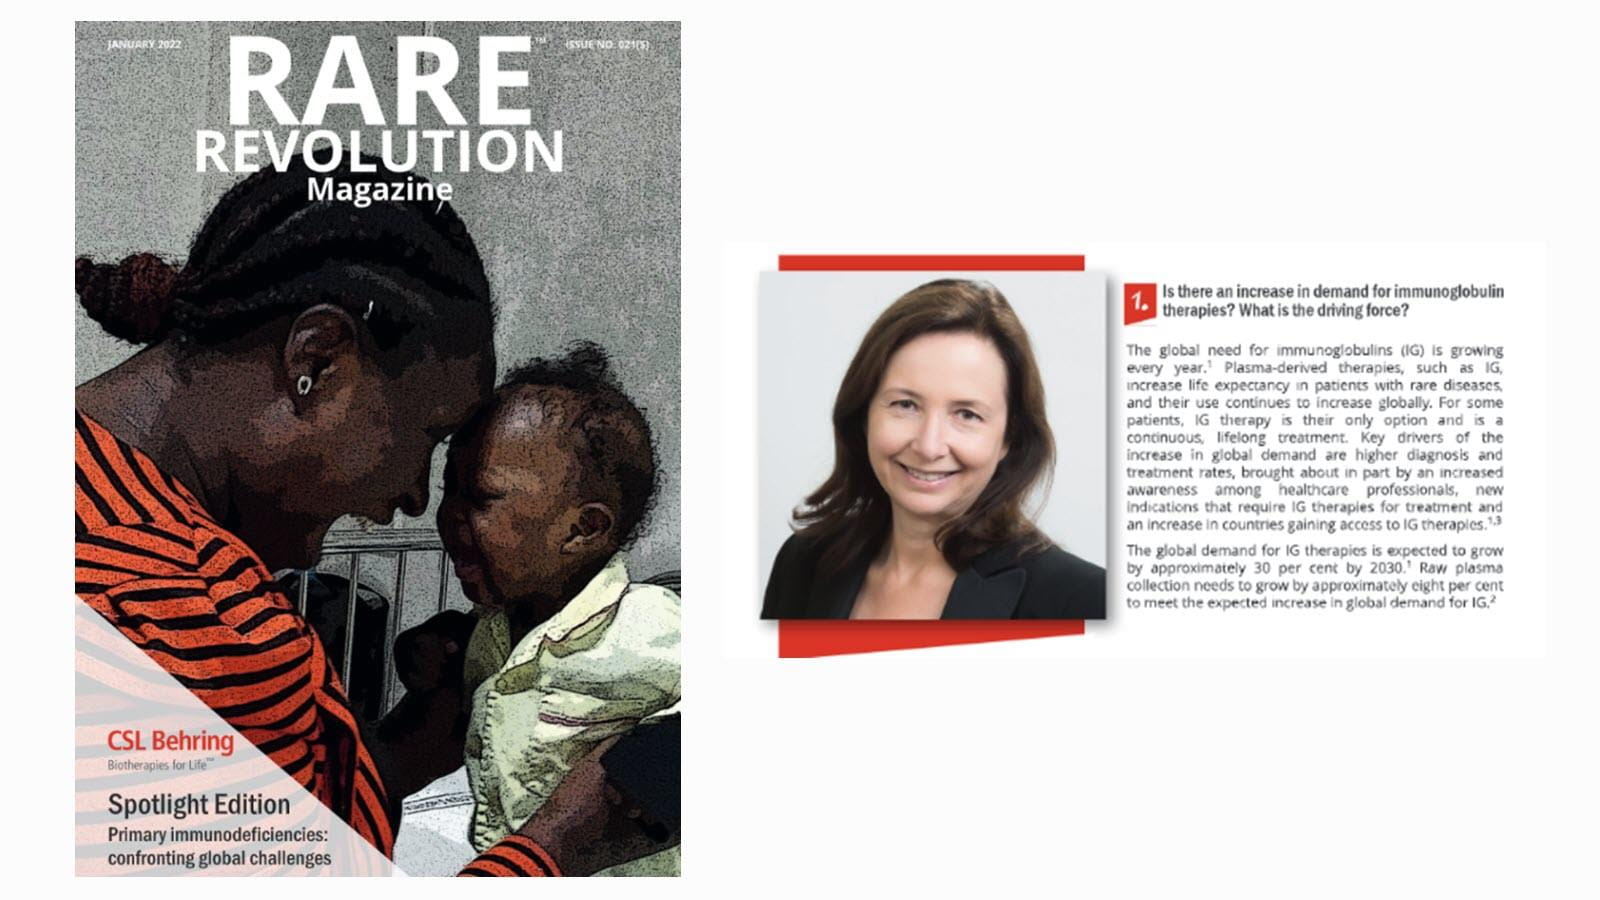 The magazine cover of Rare Revolution with a photo of a mom smiling at her baby and featuring a Q&A about immunoglobulin supply